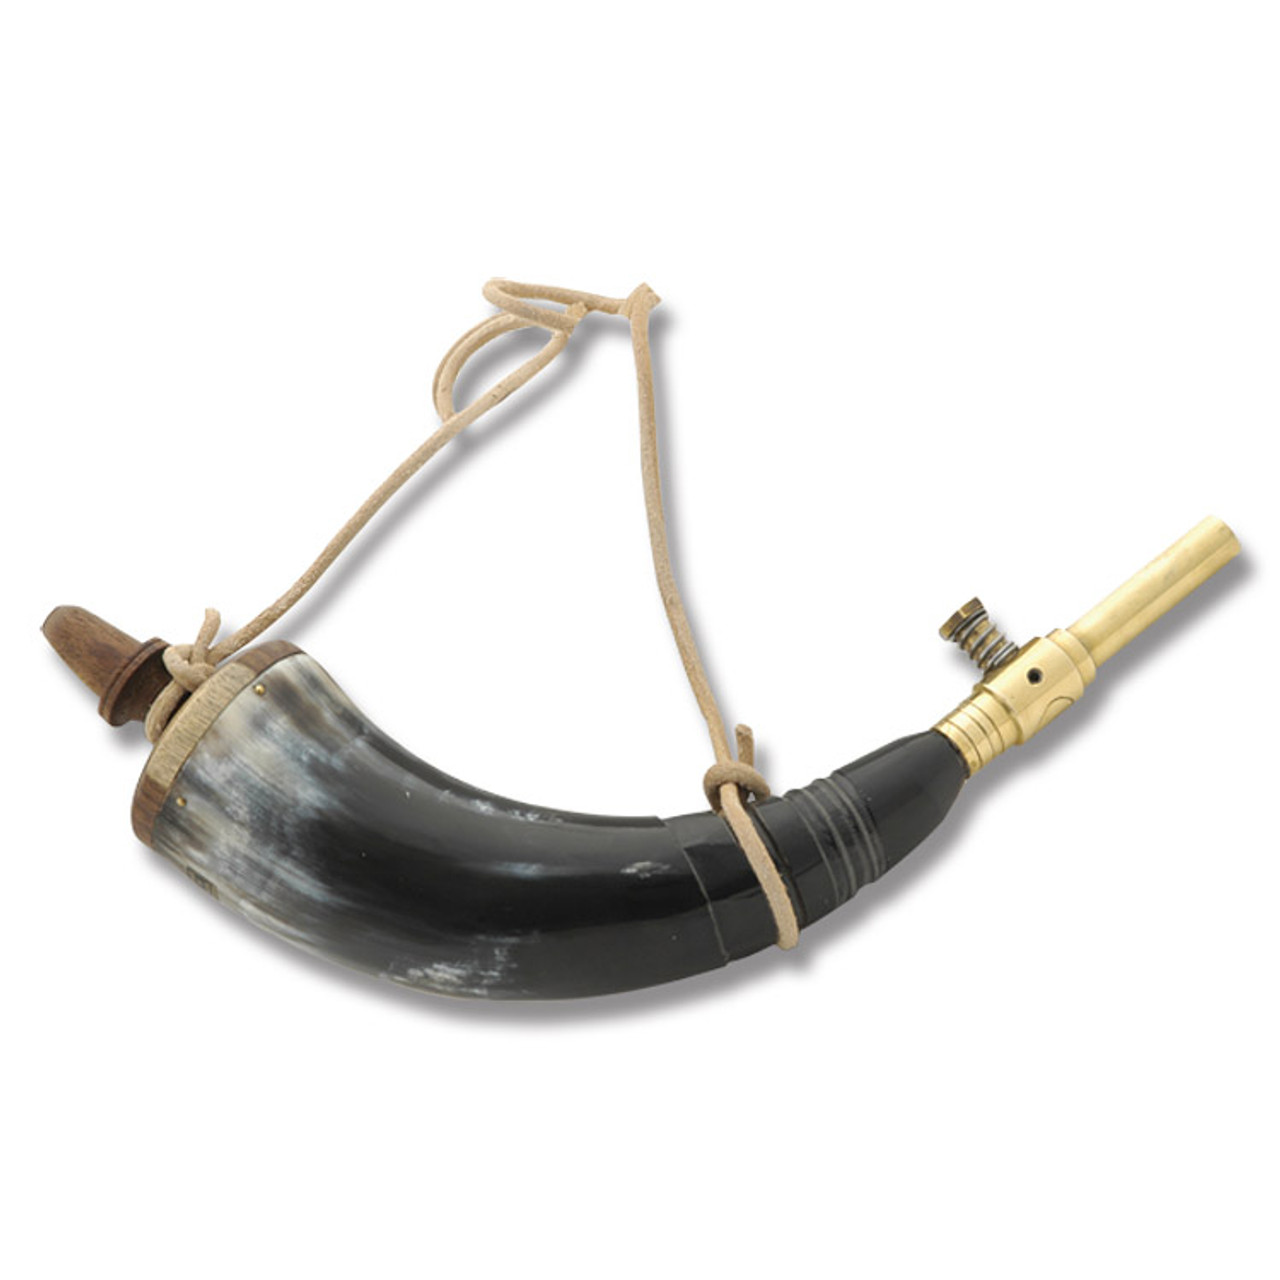 Powder Horn with Brass Dispensing Tip - Smoky Mountain Knife Works